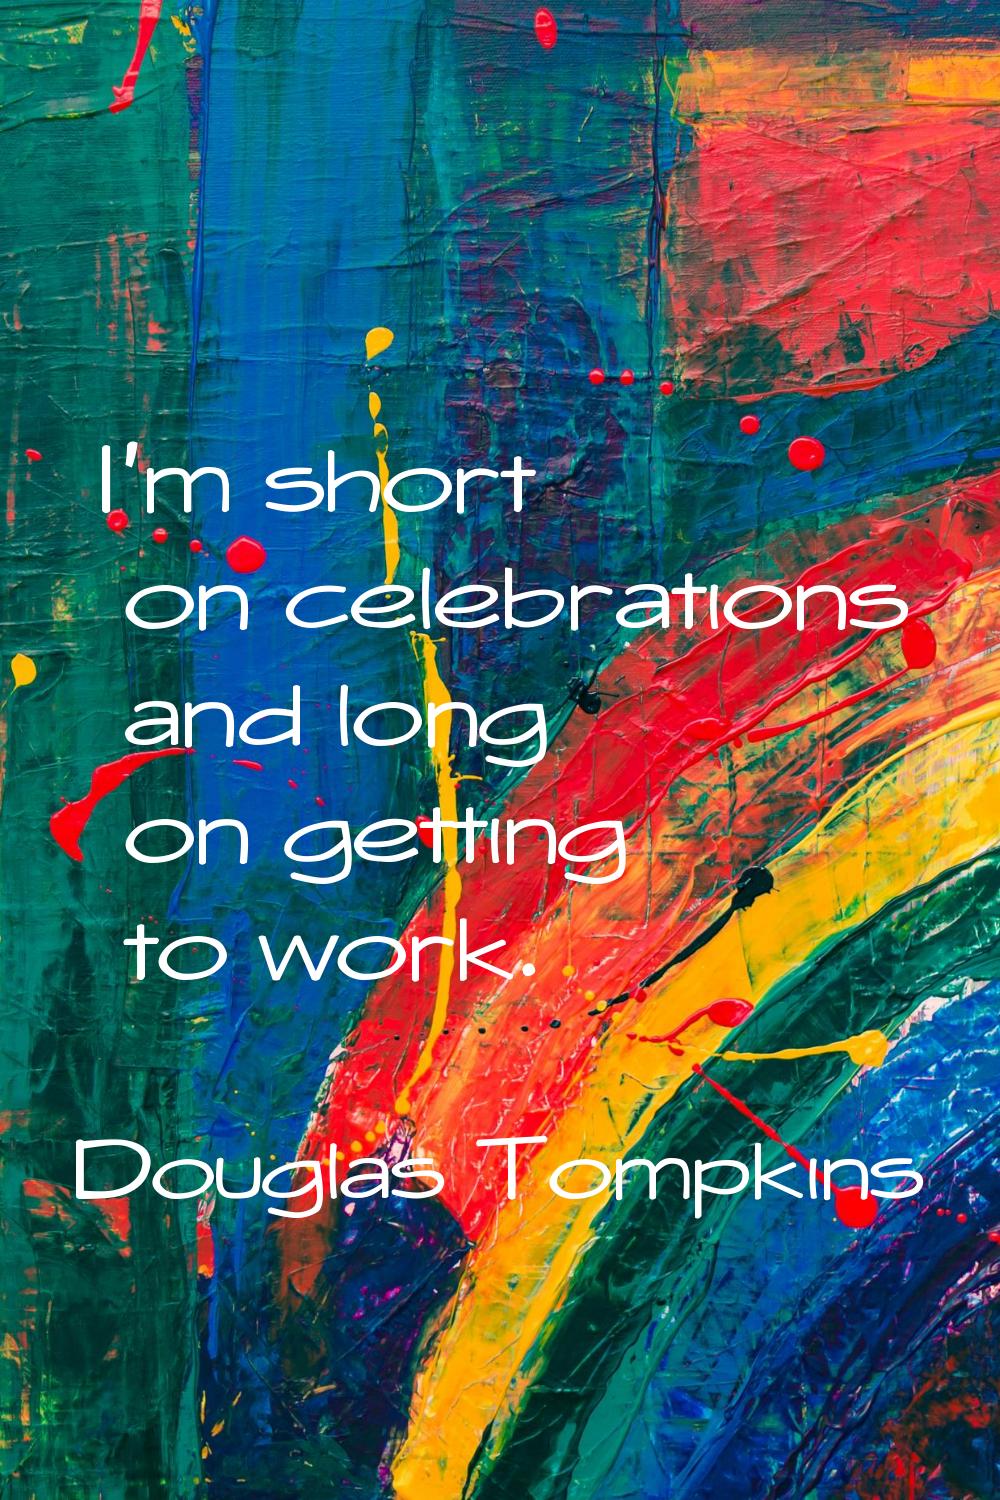 I'm short on celebrations and long on getting to work.